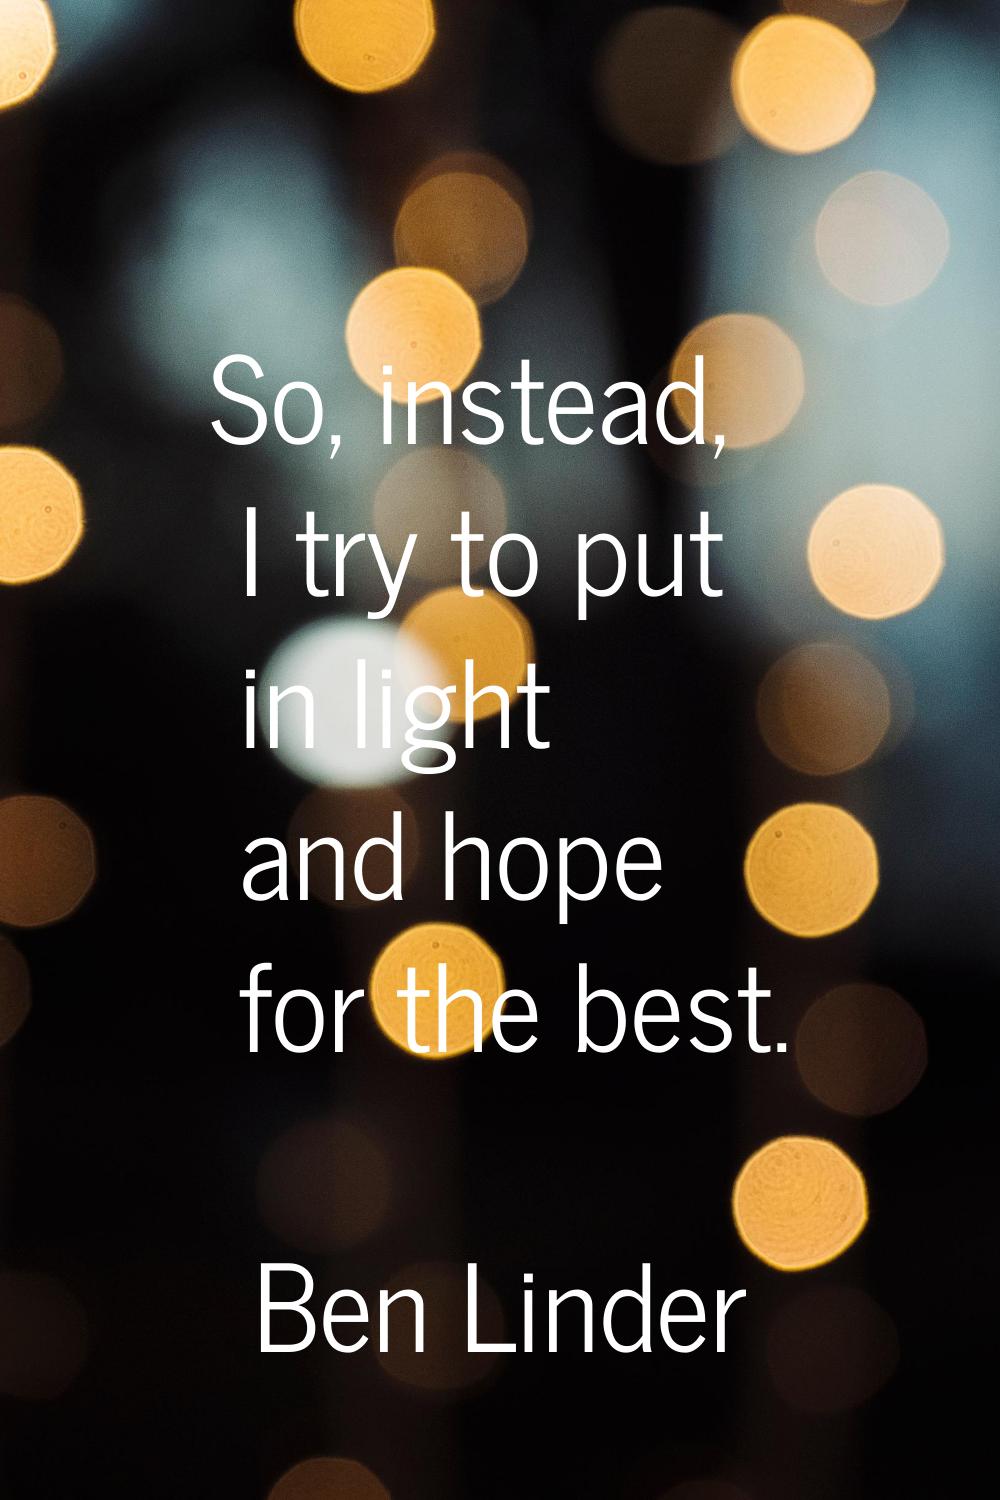 So, instead, I try to put in light and hope for the best.